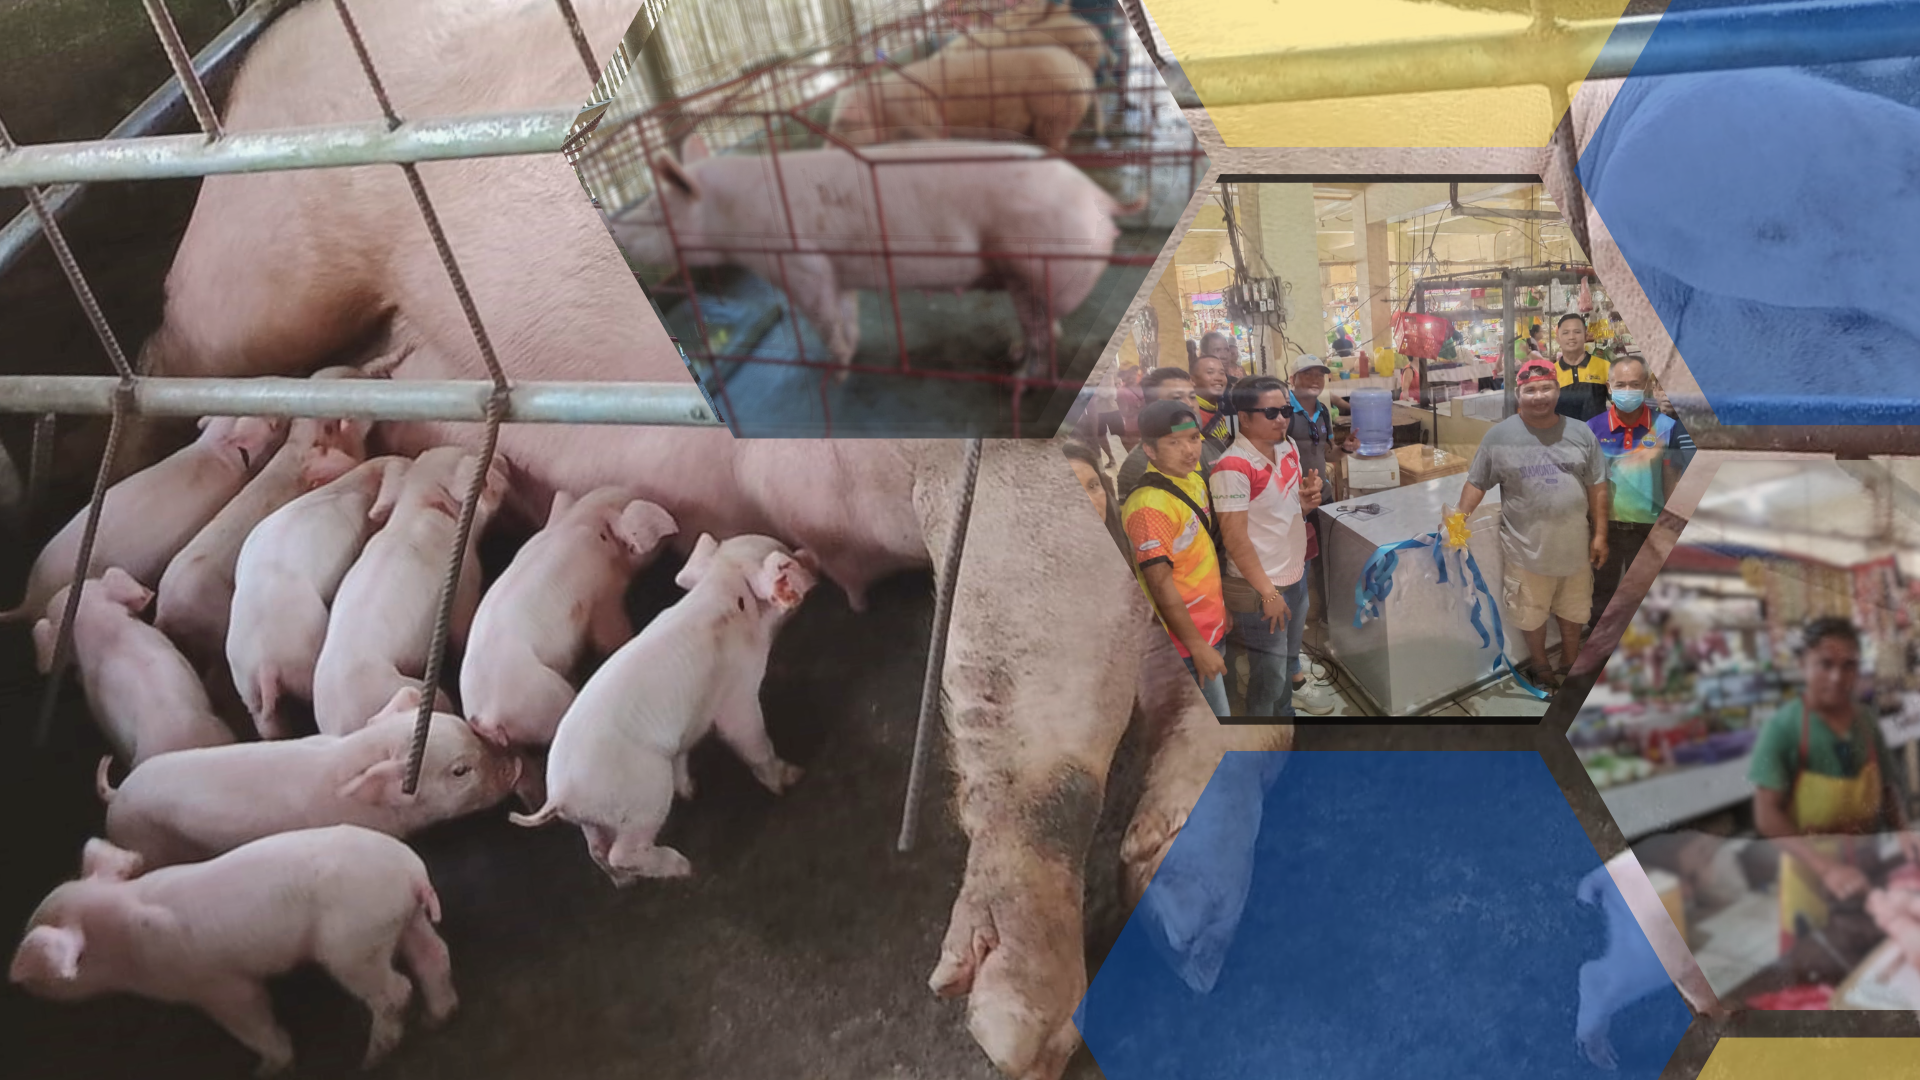 Swine-tastic: Negros FA puts up own meat shop after steady income from SAAD hog project